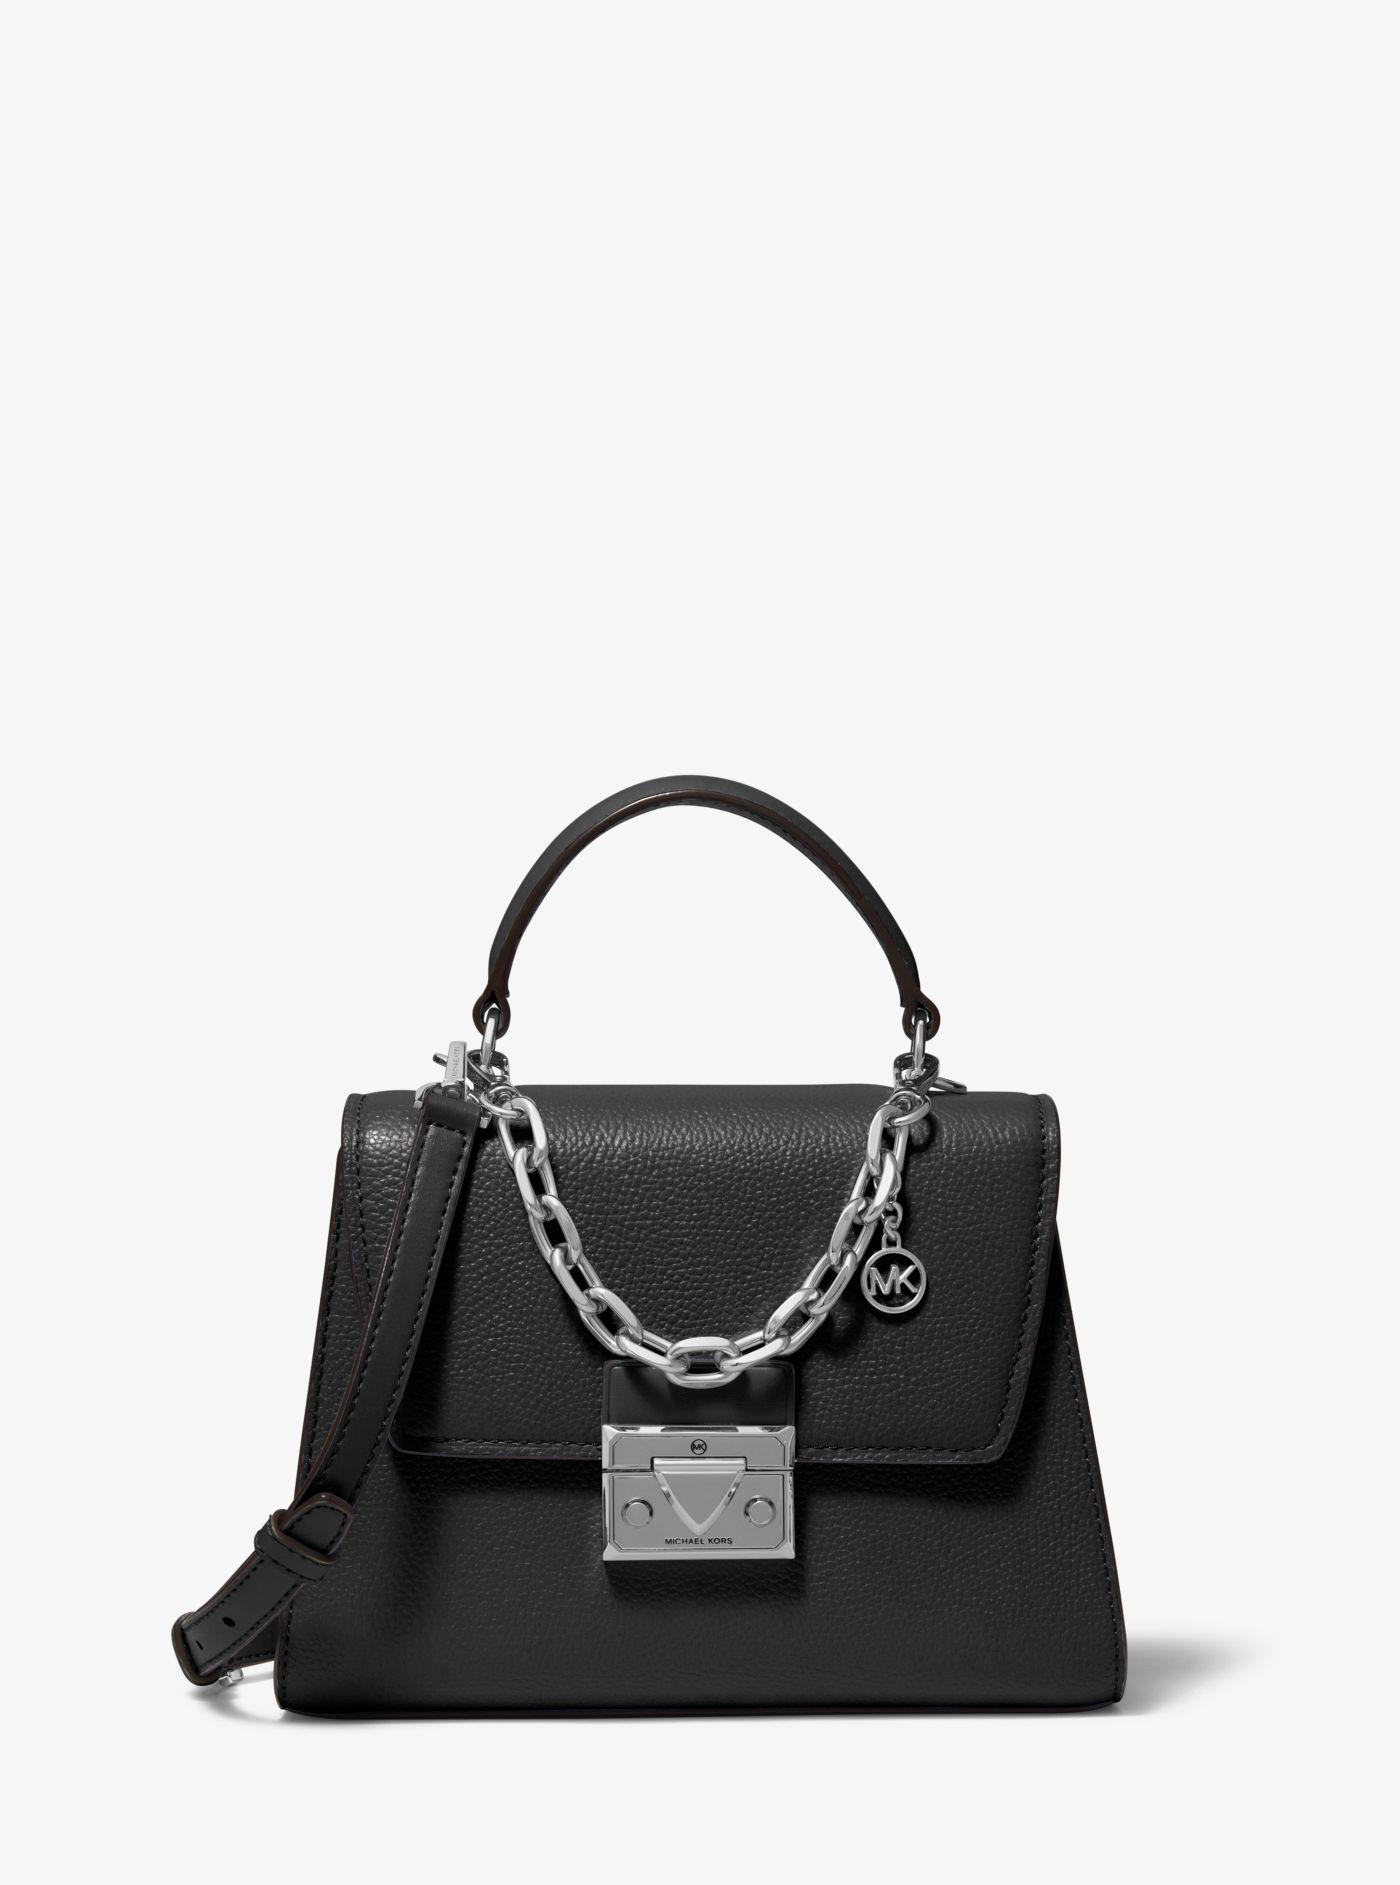 Michael Kors Serena Small Pebbled Leather Satchel in Black | Lyst